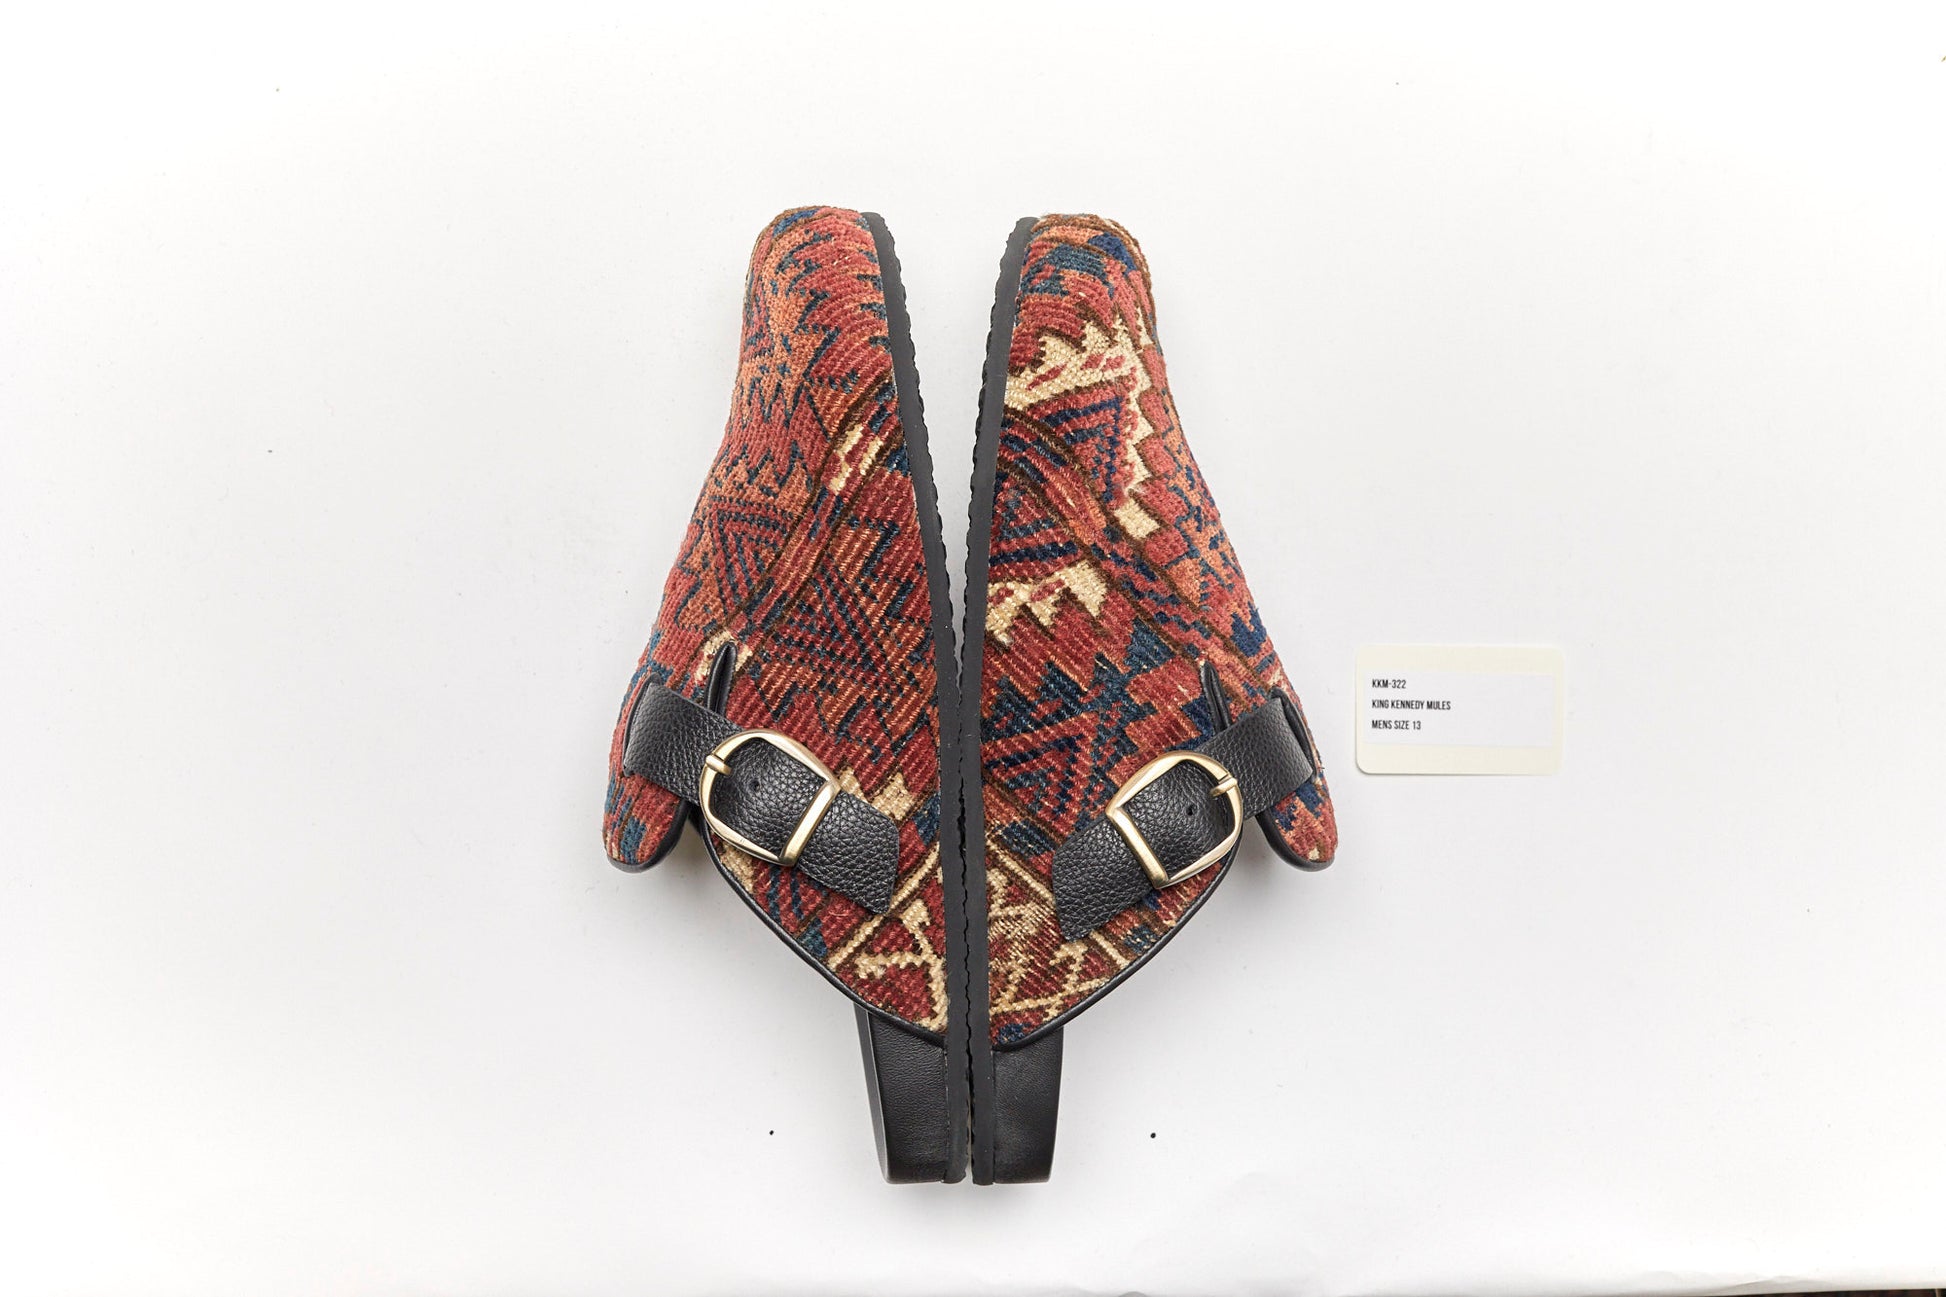 King Kennedy Rug Mules are one-of-a-kind and made of 100 year old antique Persian rug fragments with soft lambskin footbed and comfortable rubber sole. This pair is made of an antique Persian rug with a beautifully faded red base, cream, blue and amber design motifs.  